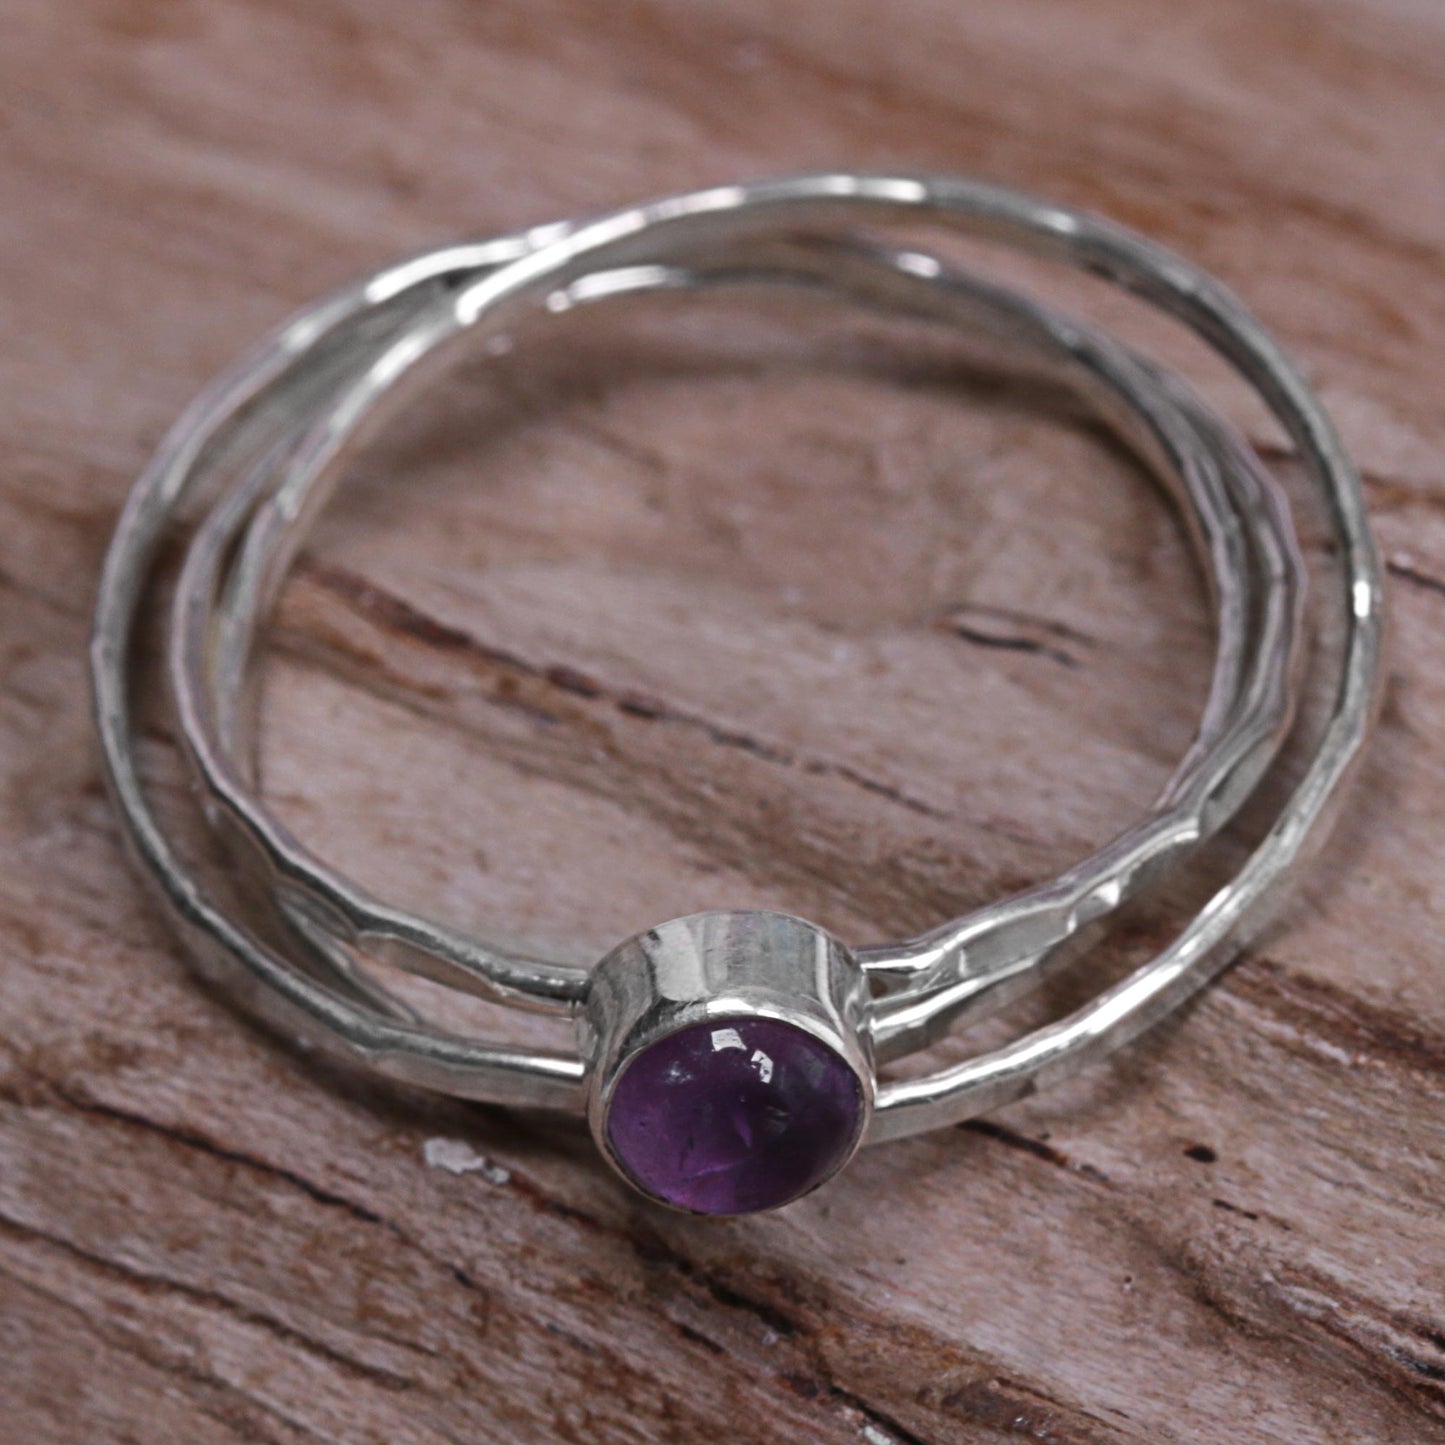 Magical Essence in Purple Amethyst and Sterling Silver Solitaire Ring from Indonesia